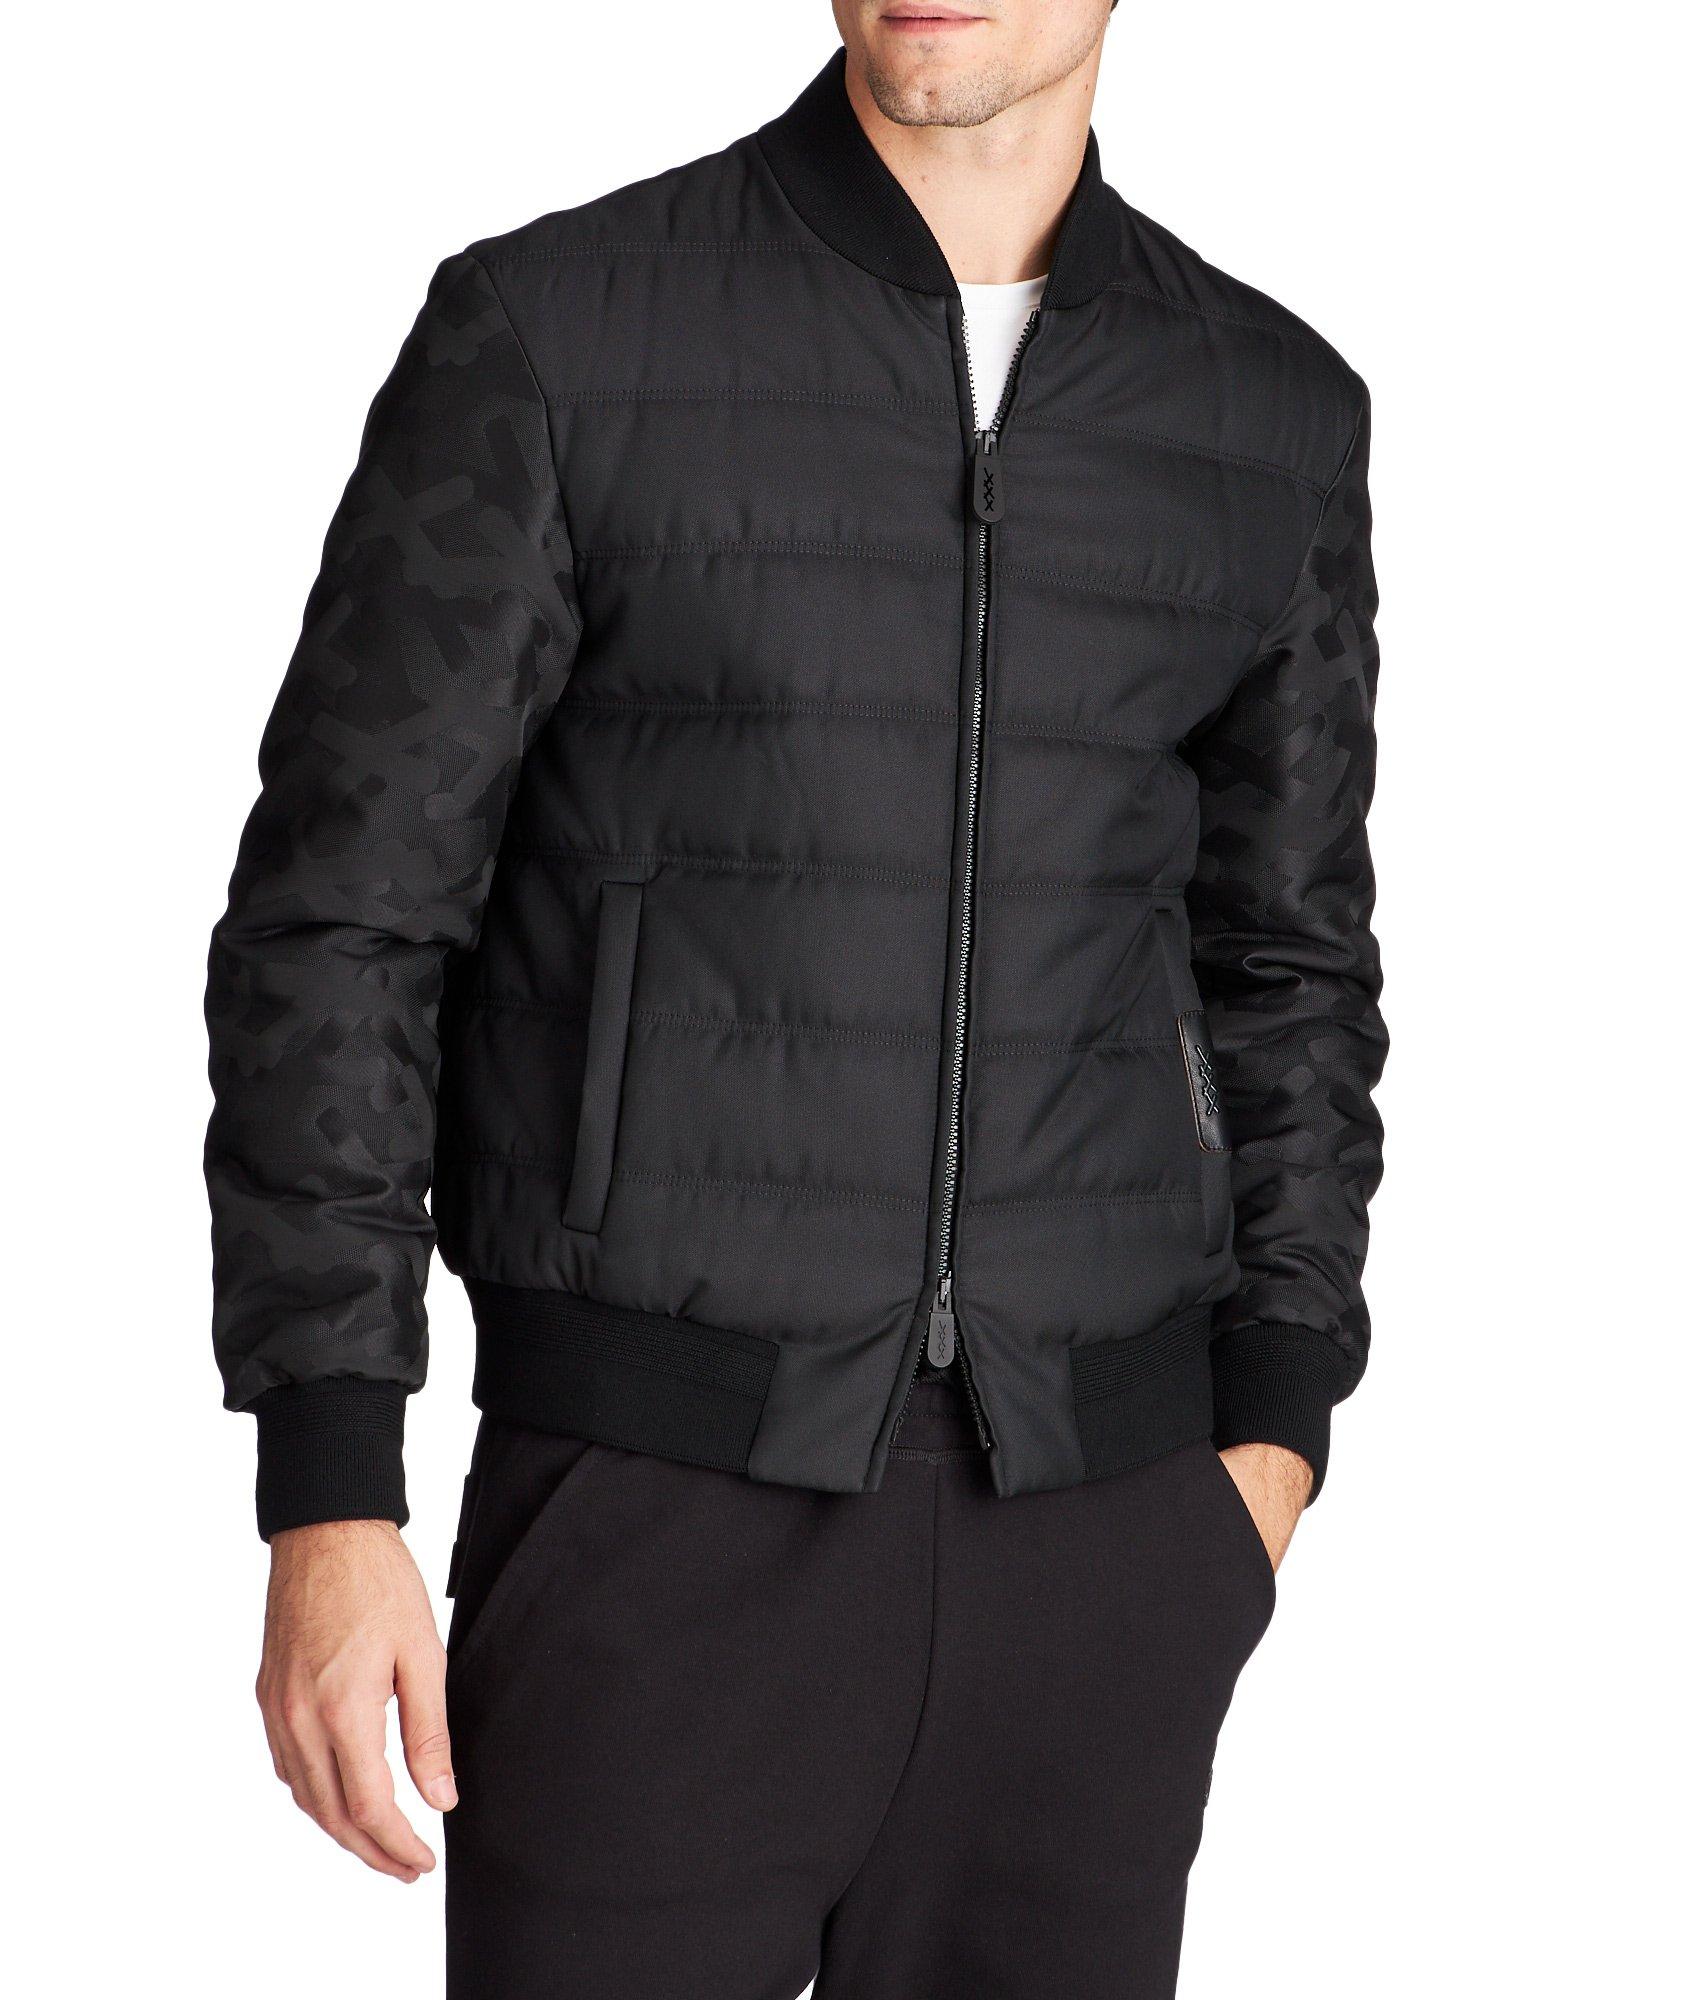 Couture Bomber Jacket image 0